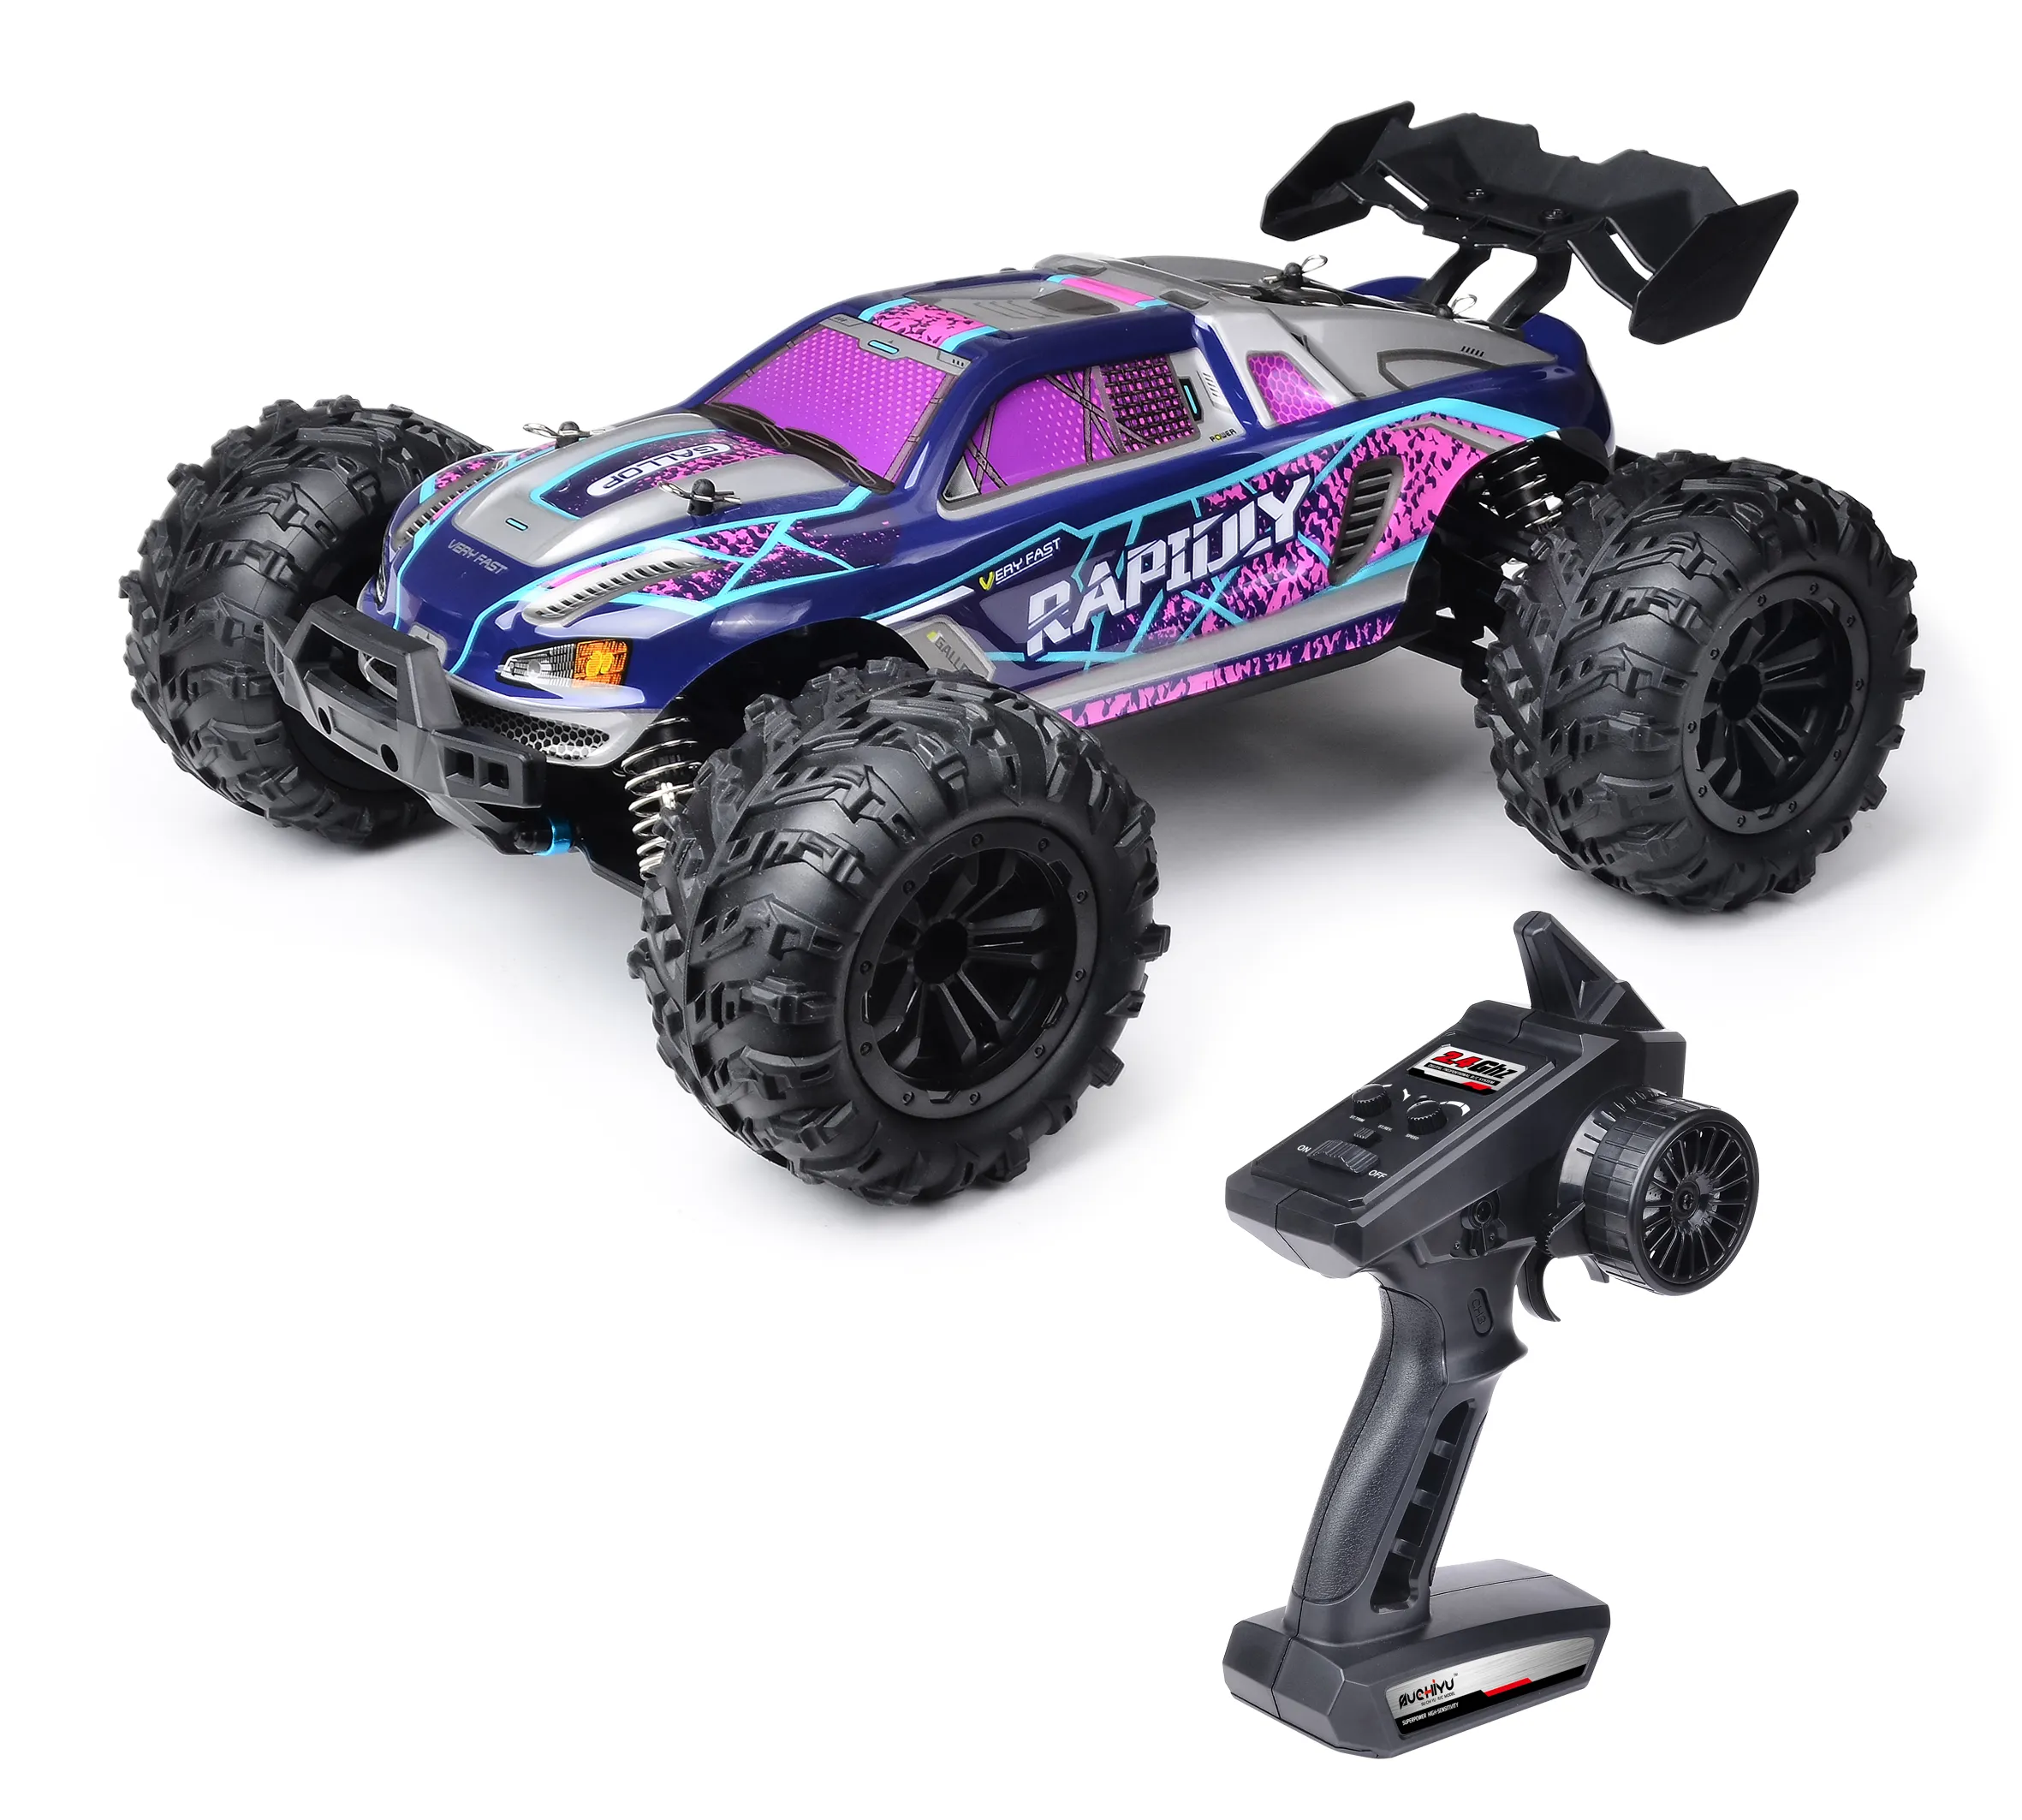 Flytec D864 Monster Truck 1:16 4WD RC Rock Climbing Car Off Road Vehicle Electricity Climbing Car RC Car For Kids